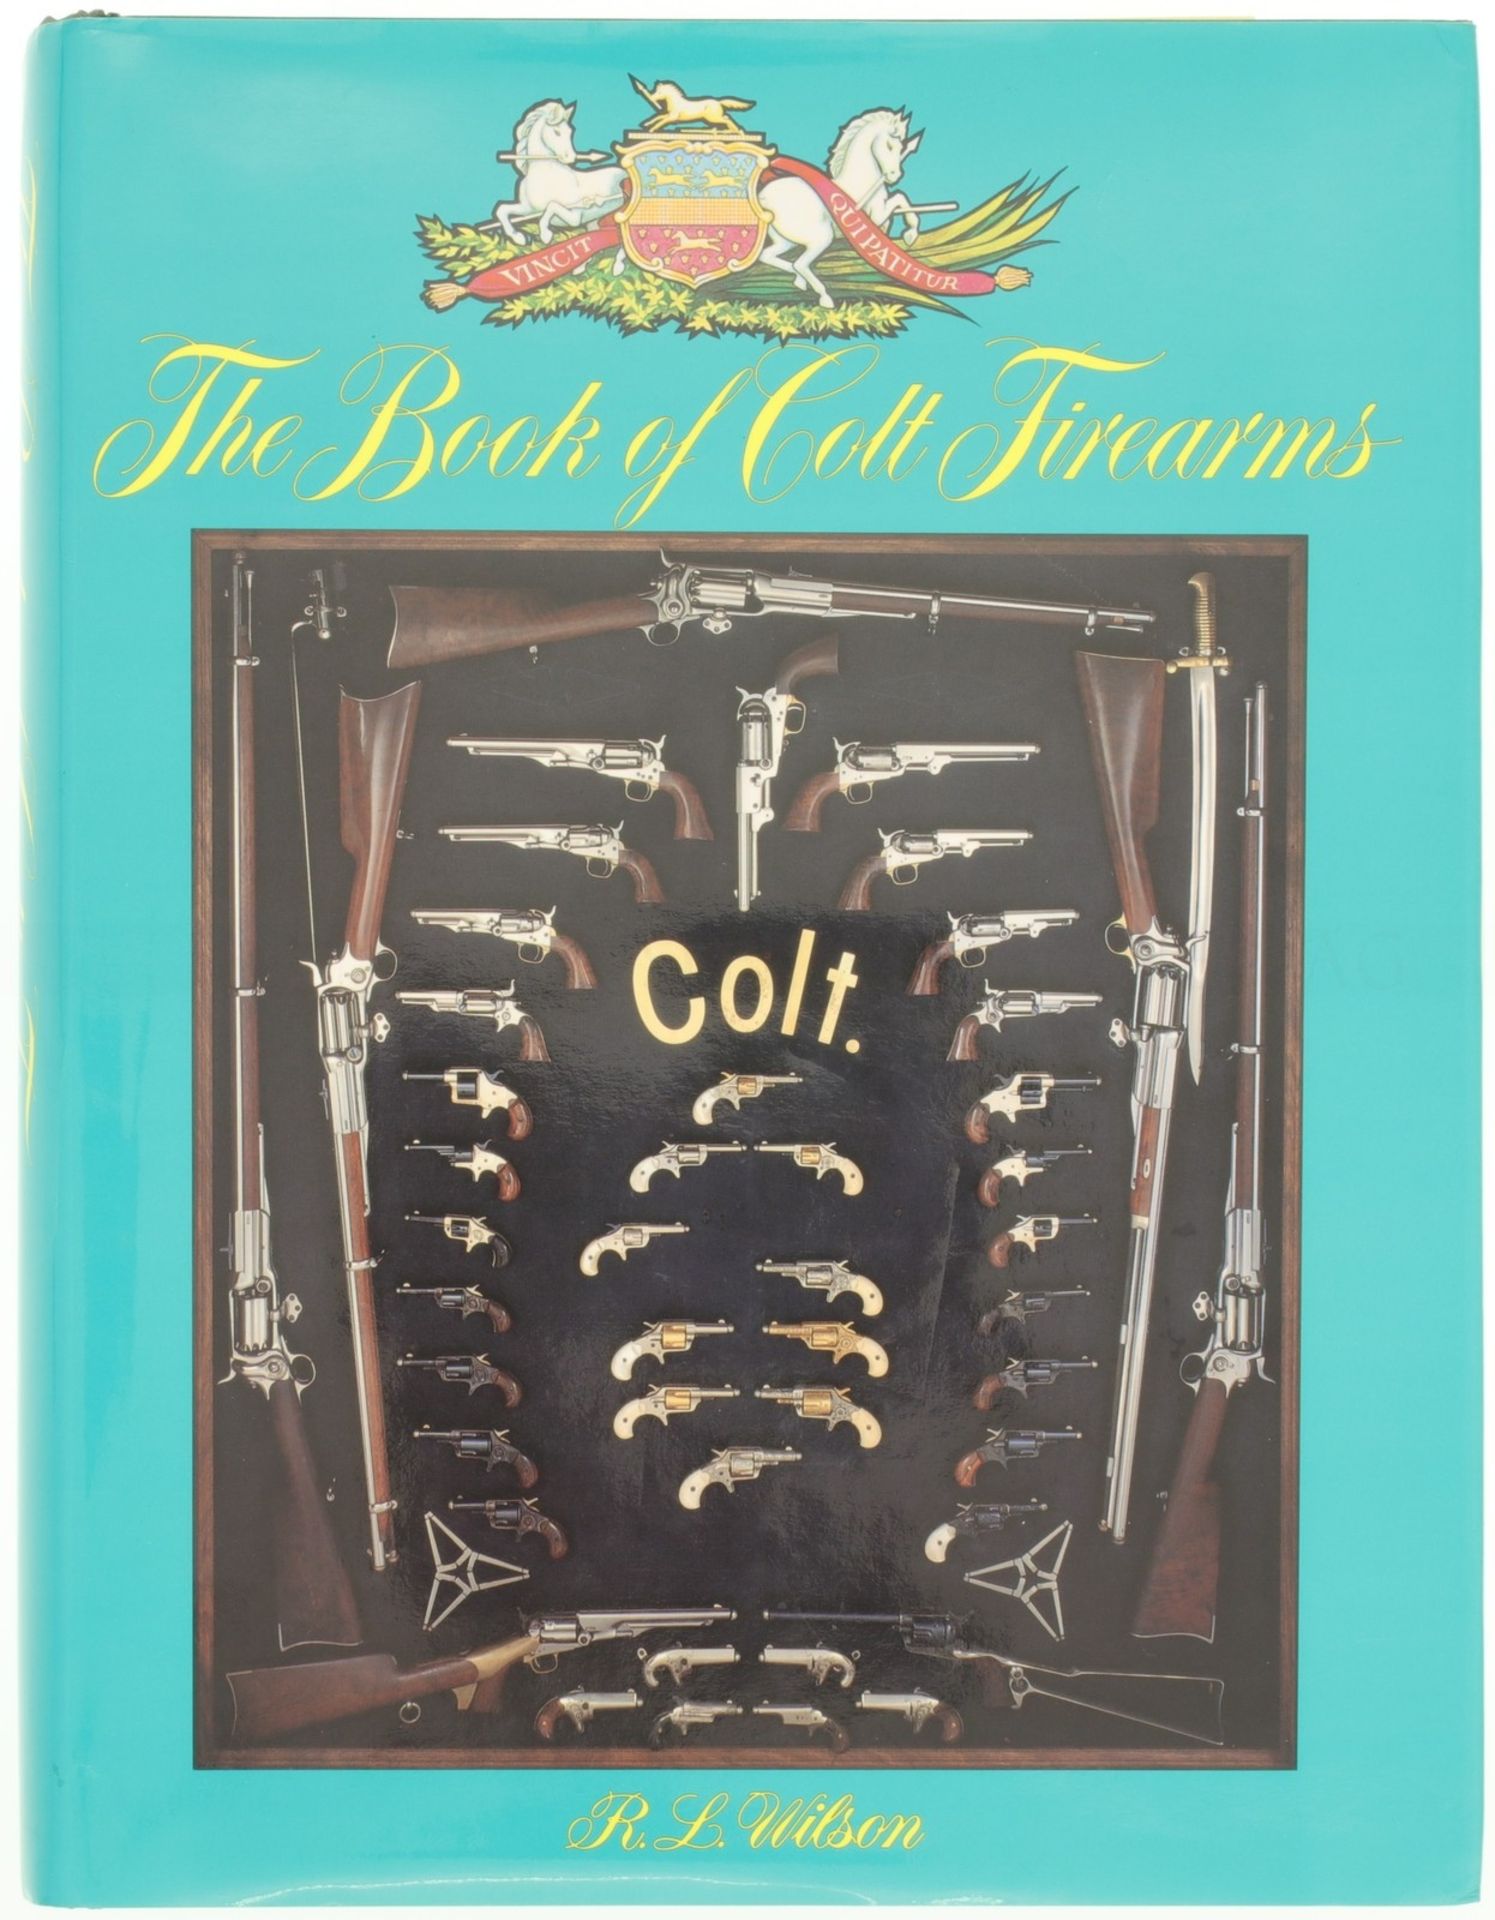 Buch, The Book of Colt Firearms